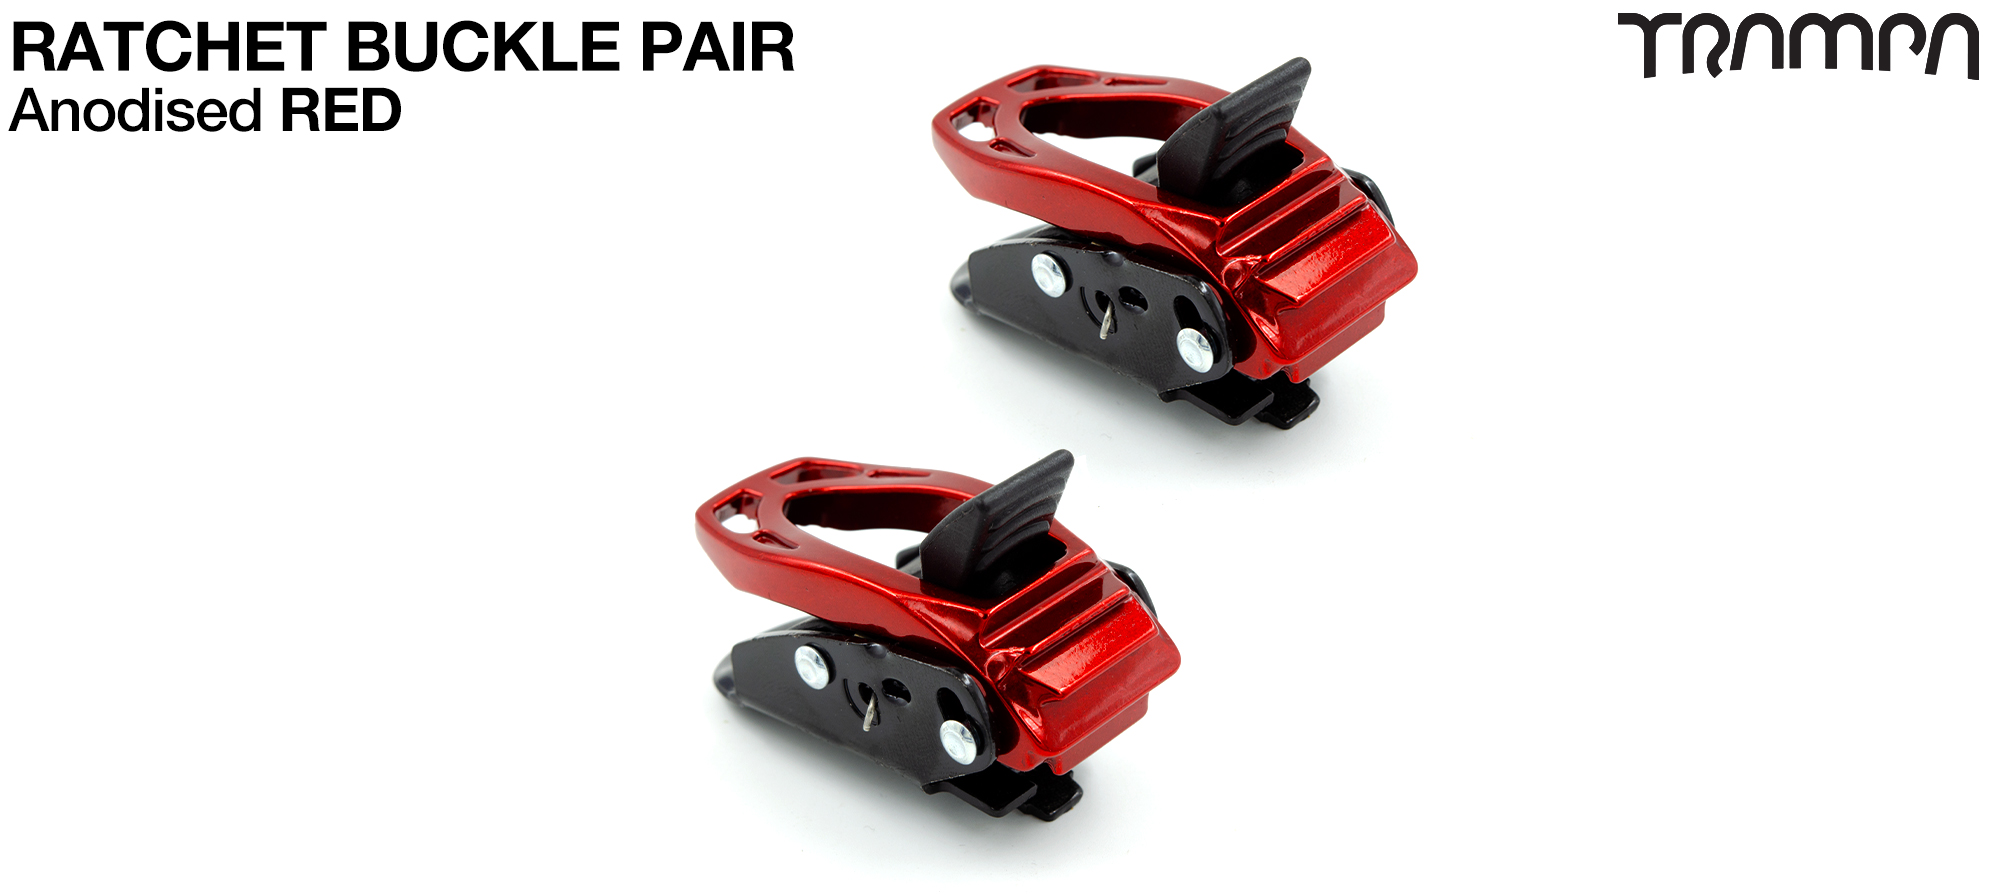 RED ANODISED Ratchet Buckles x 2 